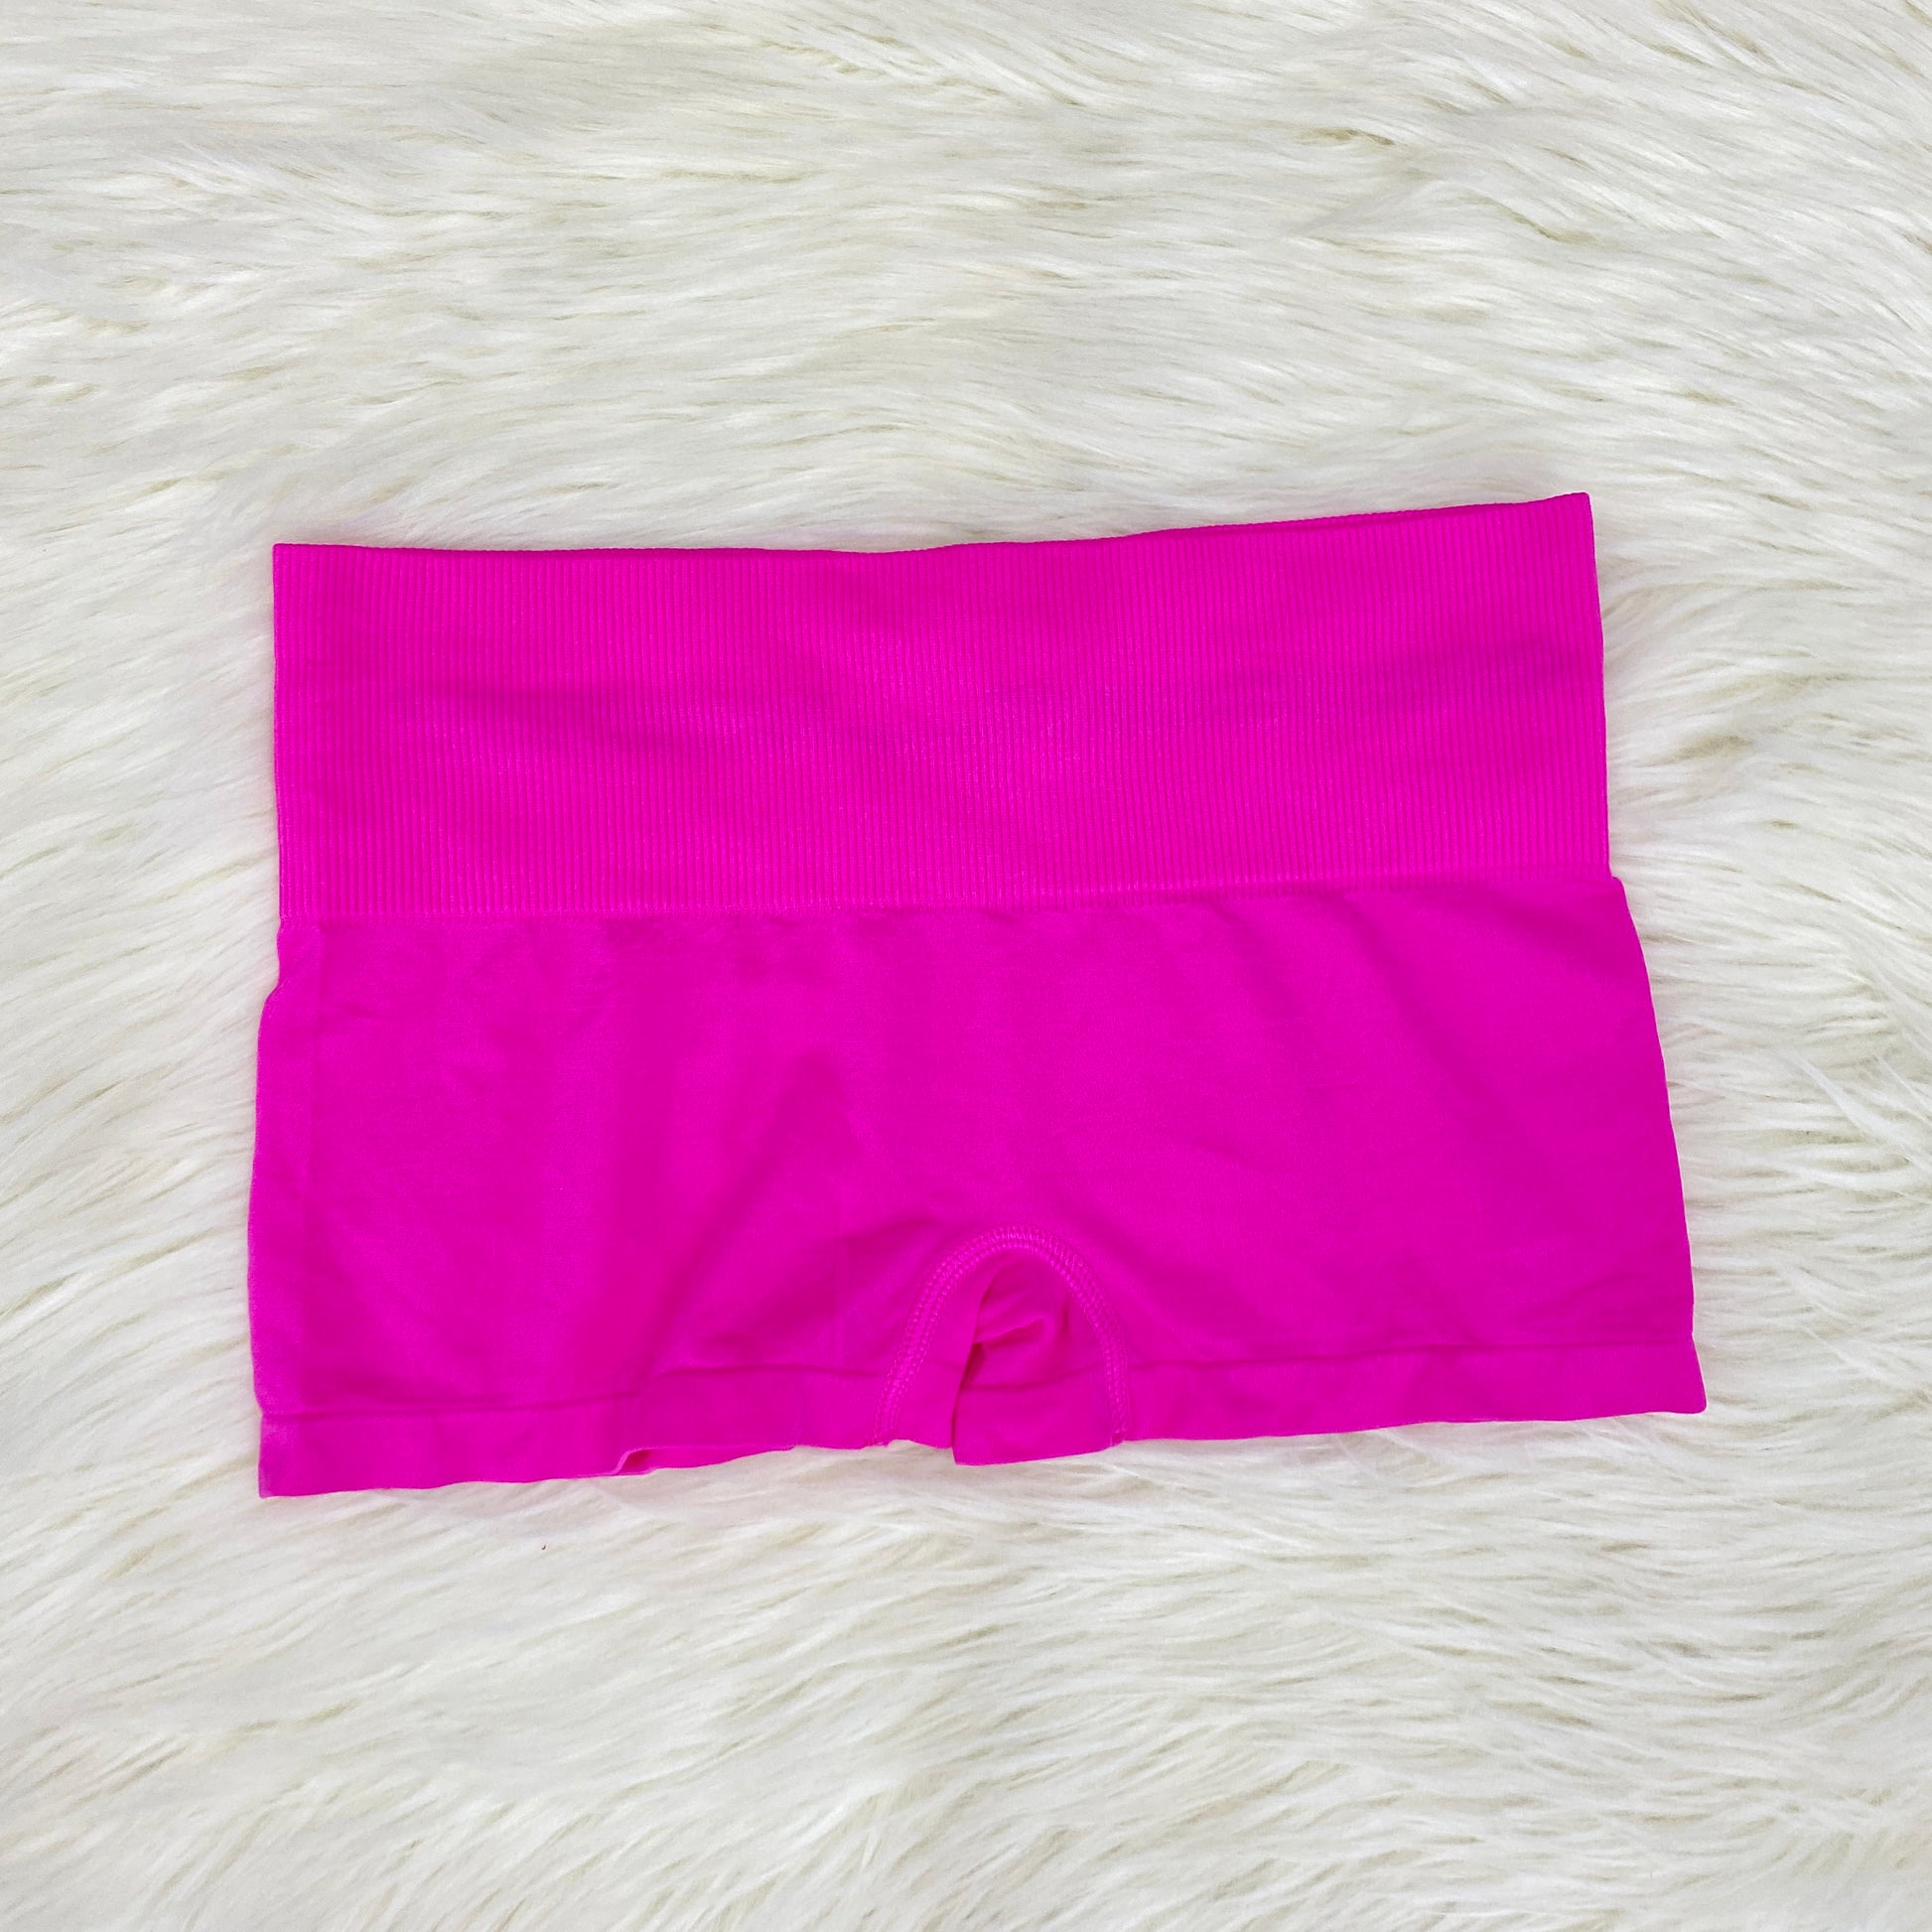 Our Boy Short Panties come in a range of sizes to suit every body shape and are available in a variety of vibrant colors and patterns.